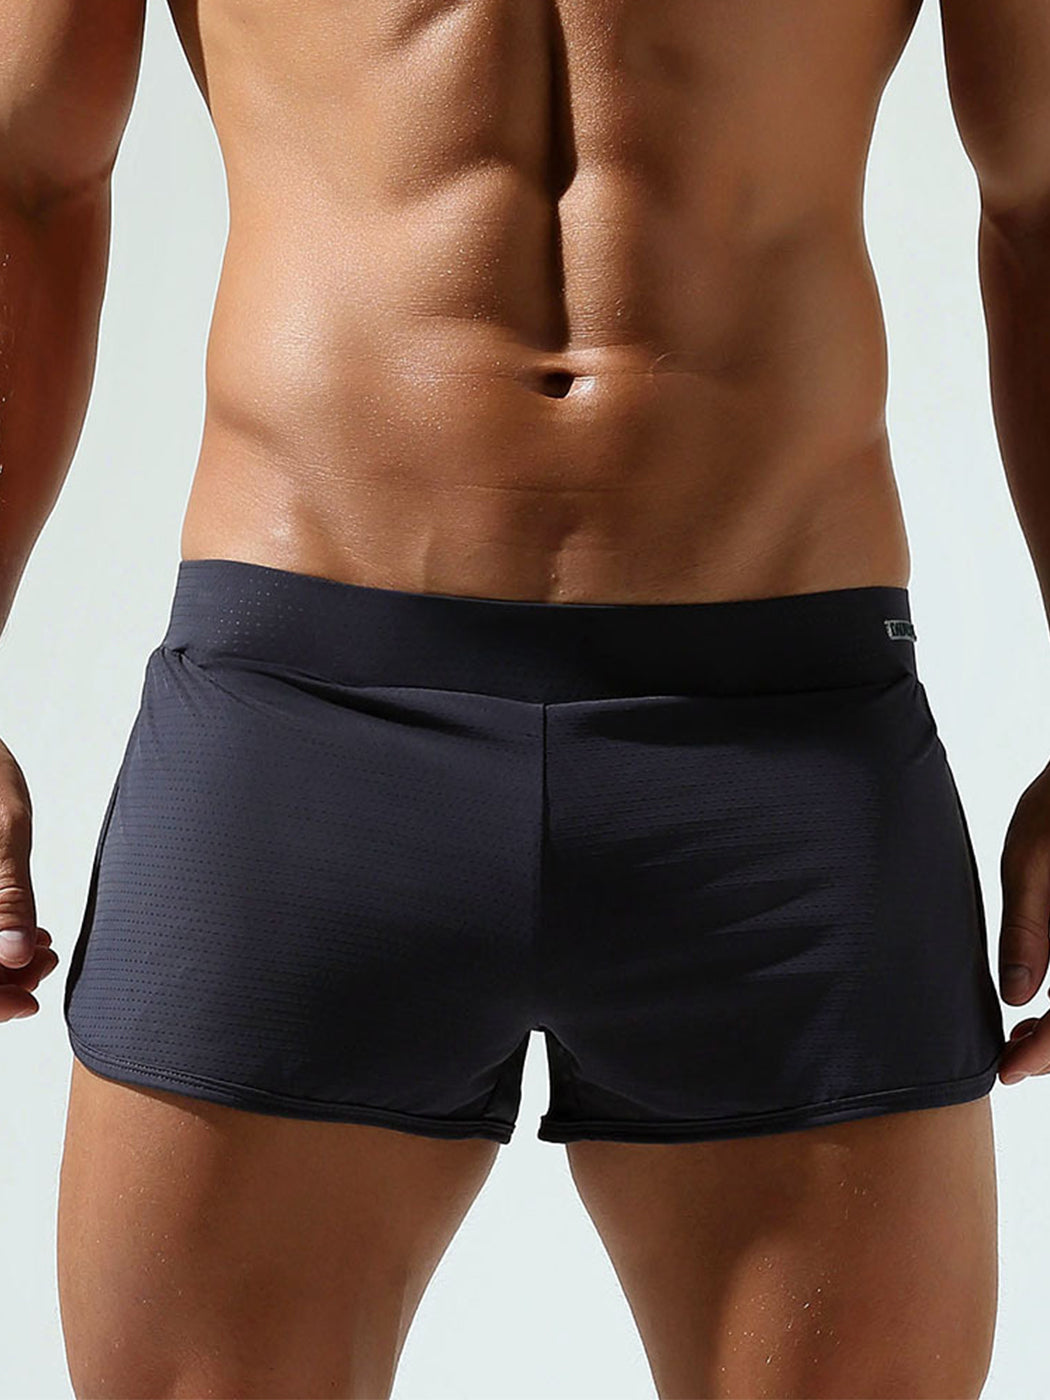 Men's Breathable Mesh Loose-fitting Home Underwear